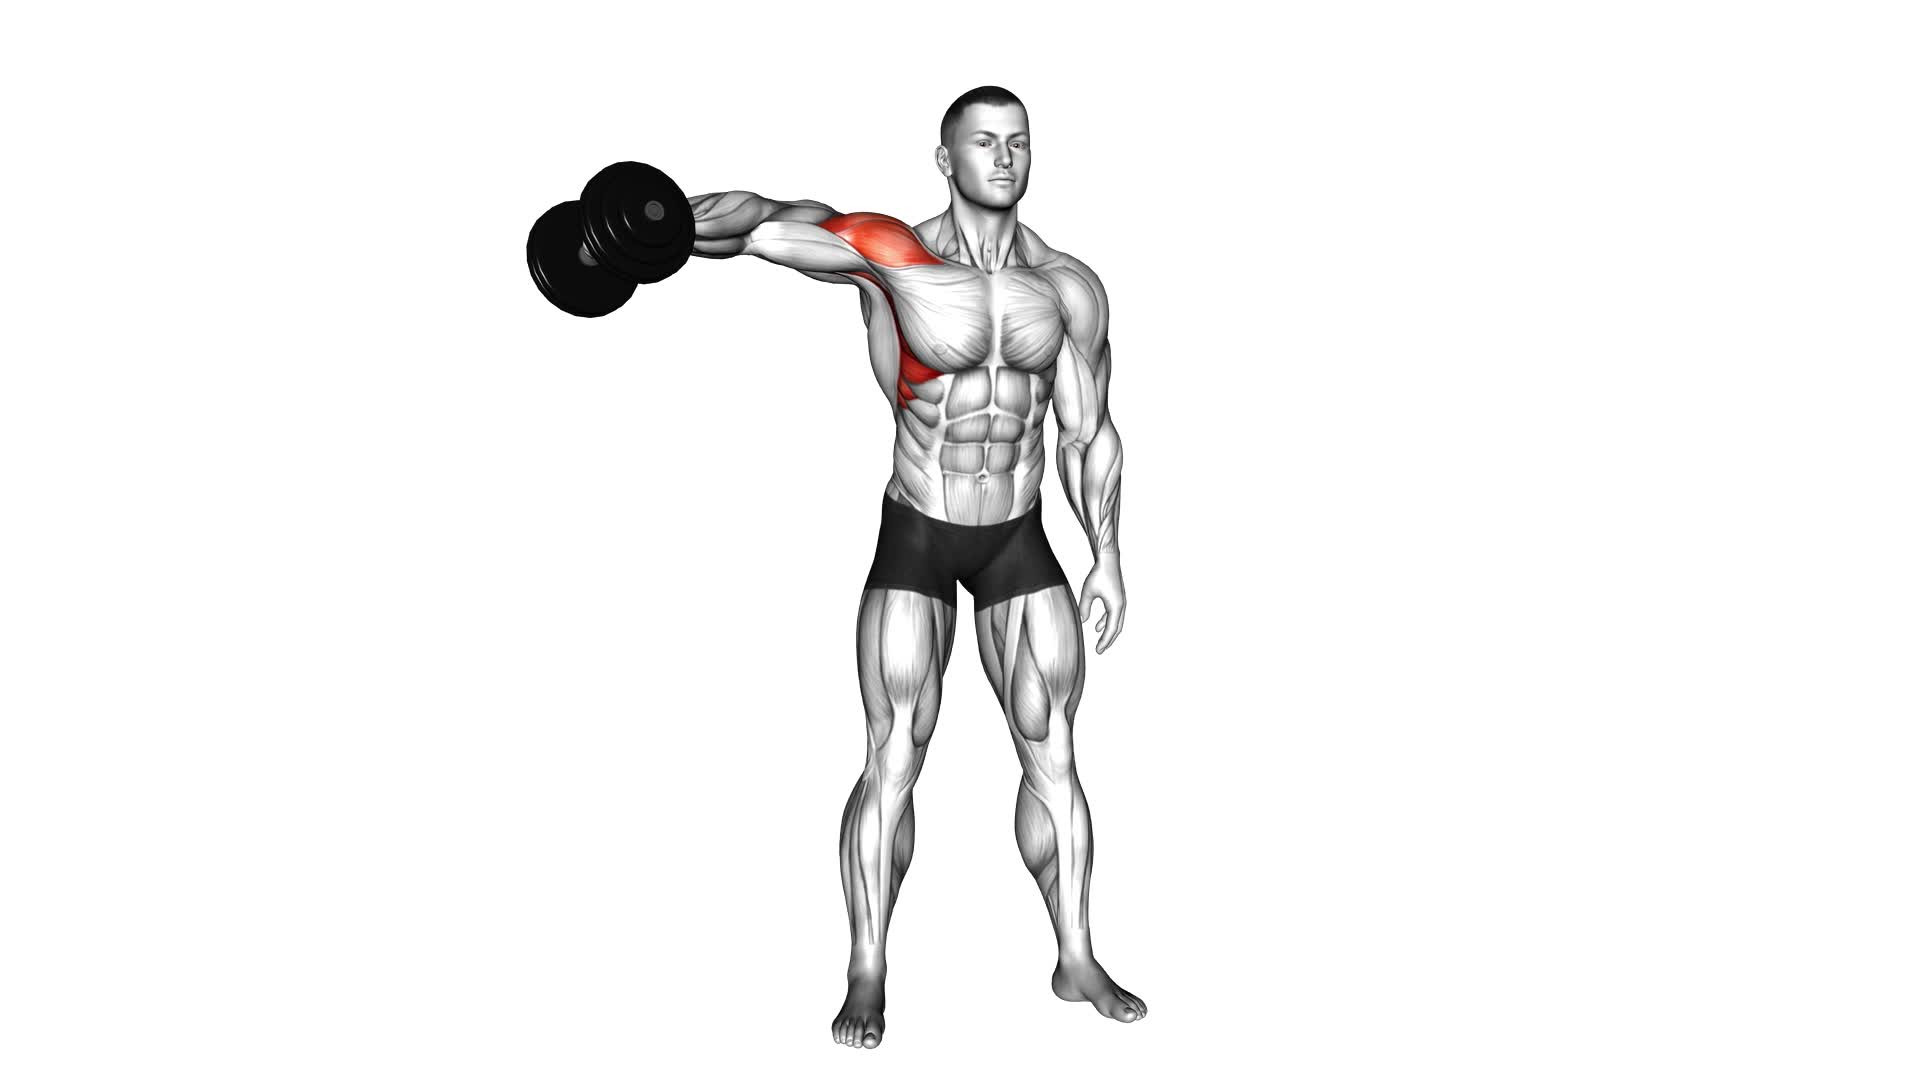 Dumbbell One Arm Lateral Raise - Video Exercise Guide & Tips